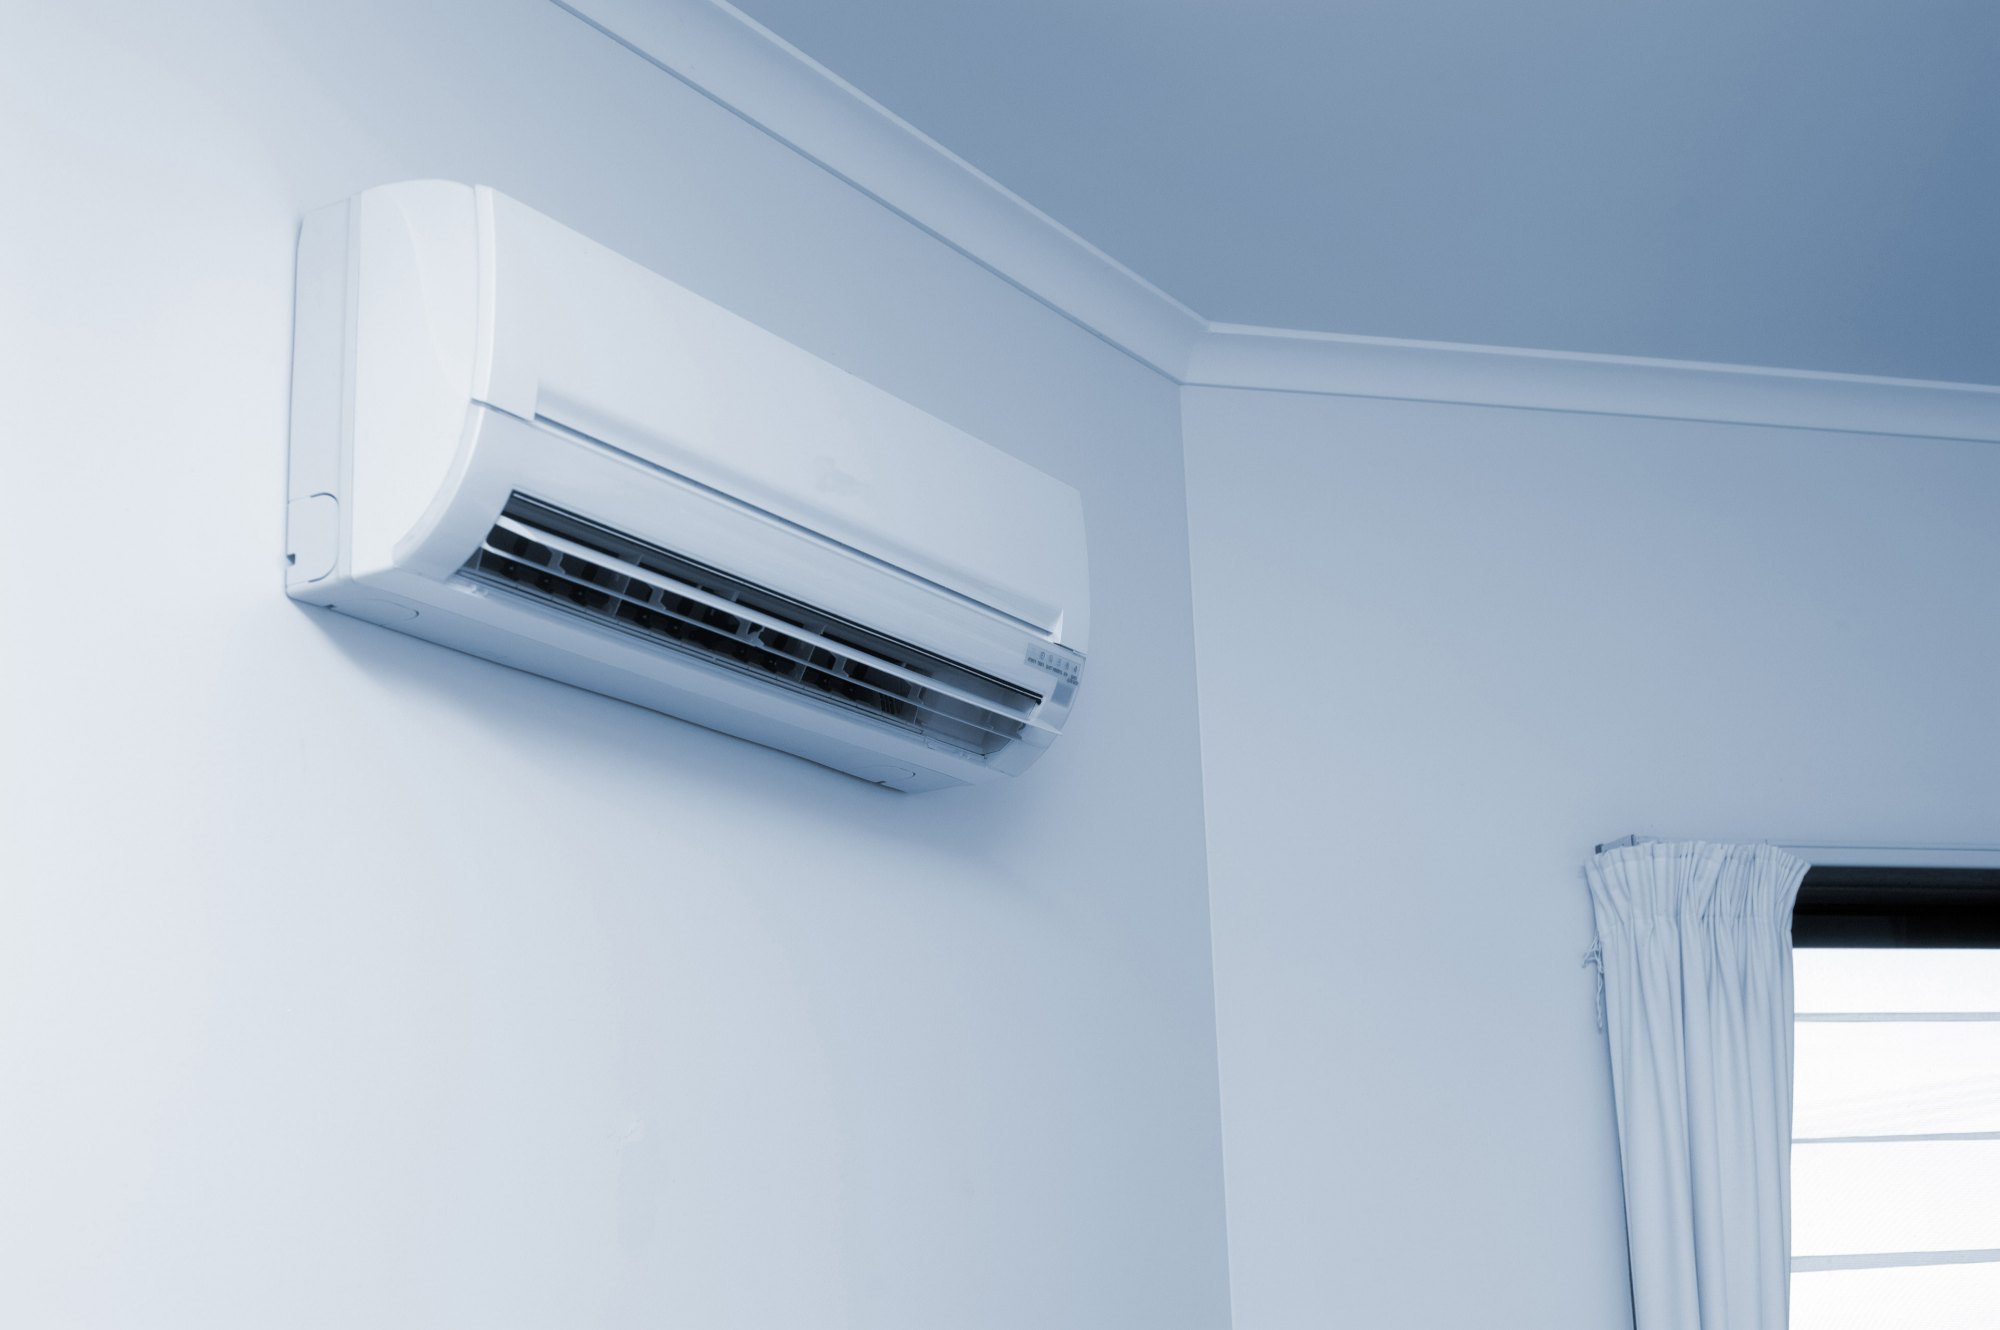 How To Install A Wall-Mounted Air Conditioner